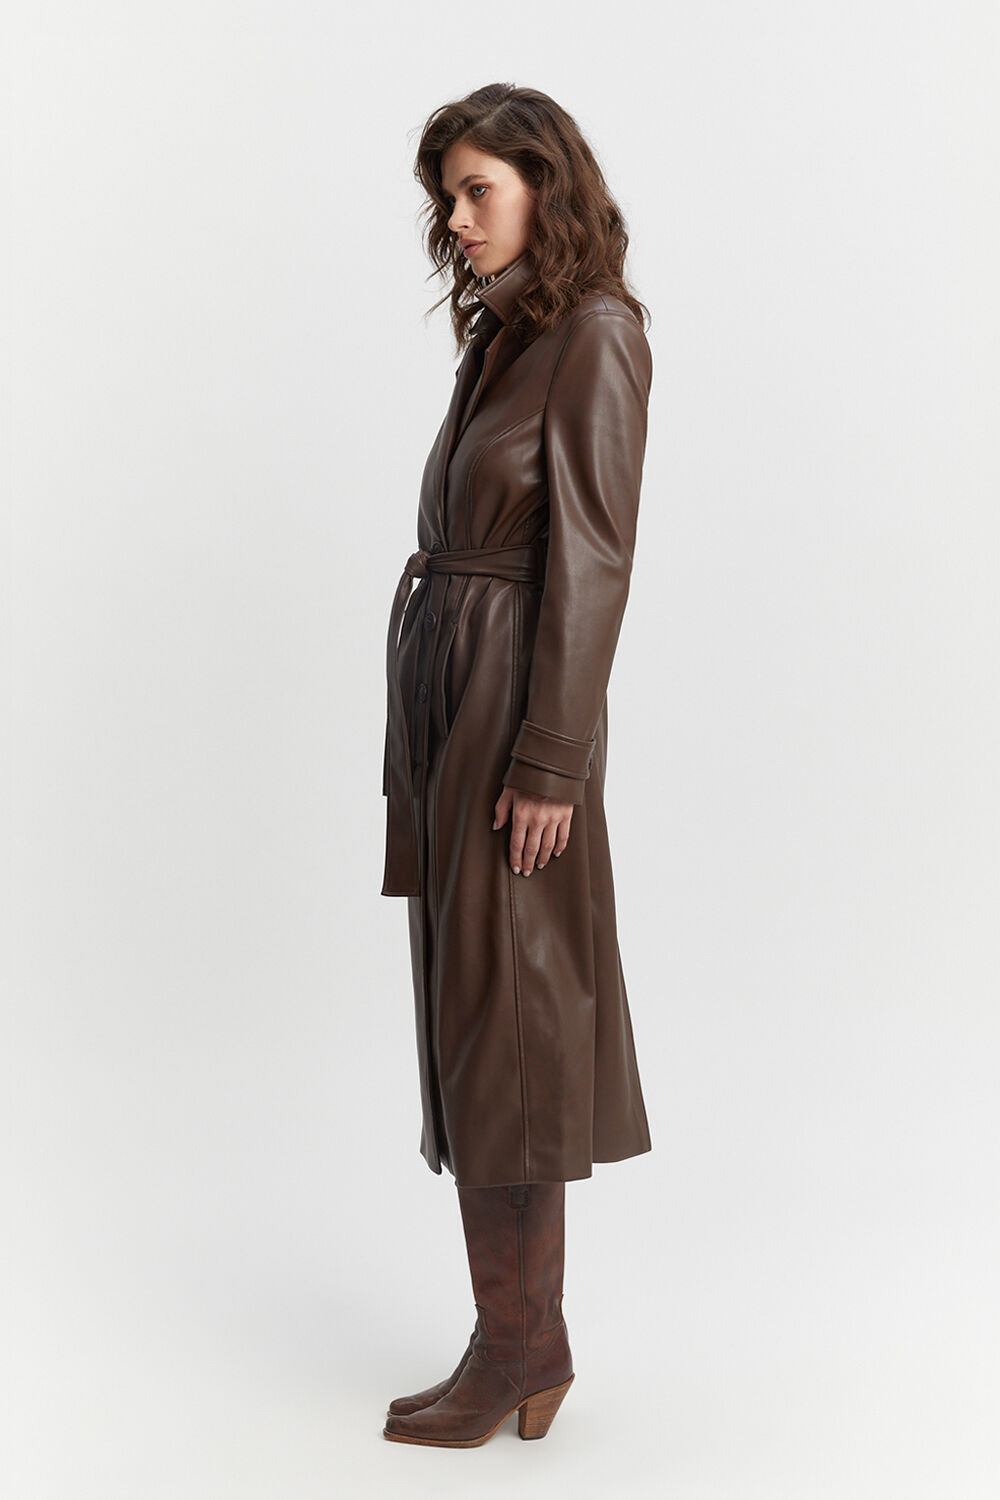 VEGAN LEATHER TRENCH COAT in colour CHOCOLATE BROWN